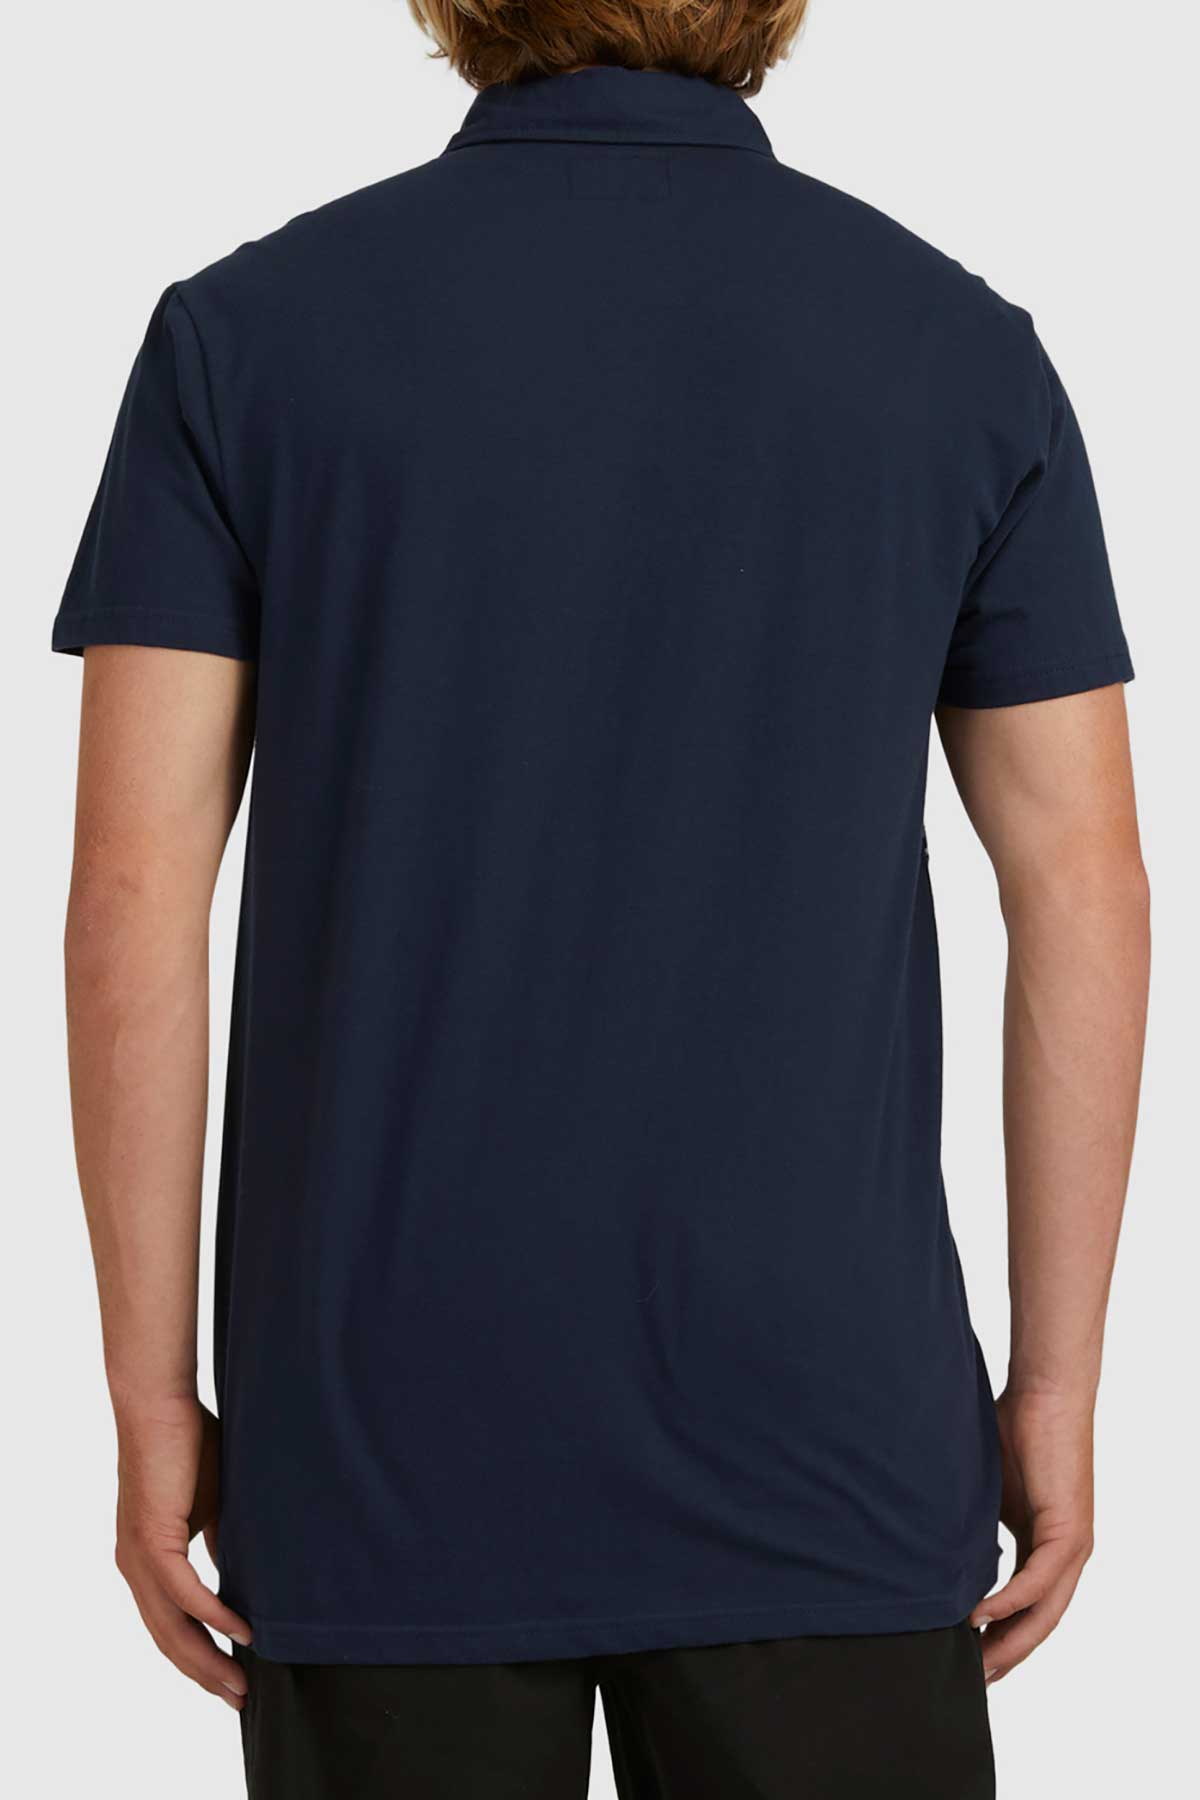 Billabong Polo Top - Banded Die Cut Navy Back